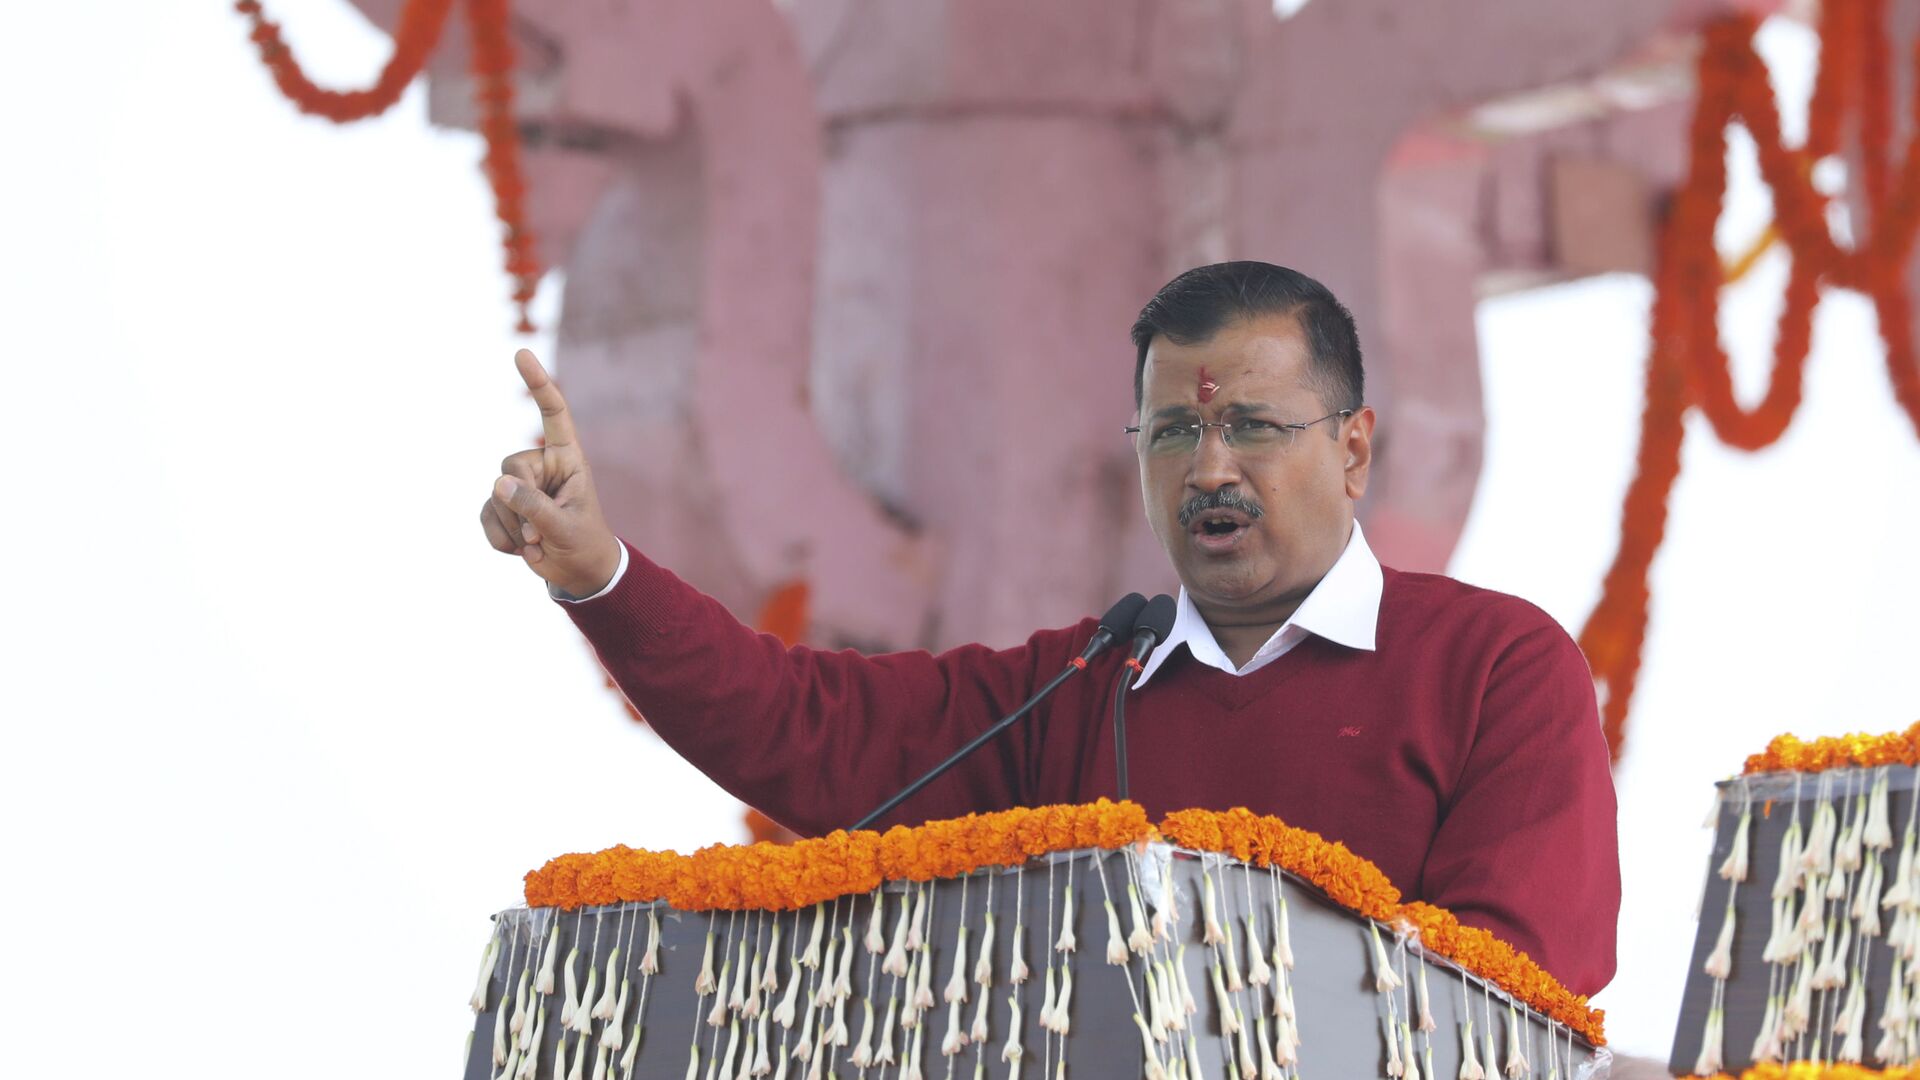 Aam Aadmi Party, or Common Man's Party, leader Arvind Kejriwal addresses the crowd after taking oath as Chief Minister of Delhi for the third time, in New Delhi, India, Sunday, Feb. 16, 2020 - Sputnik International, 1920, 17.02.2022